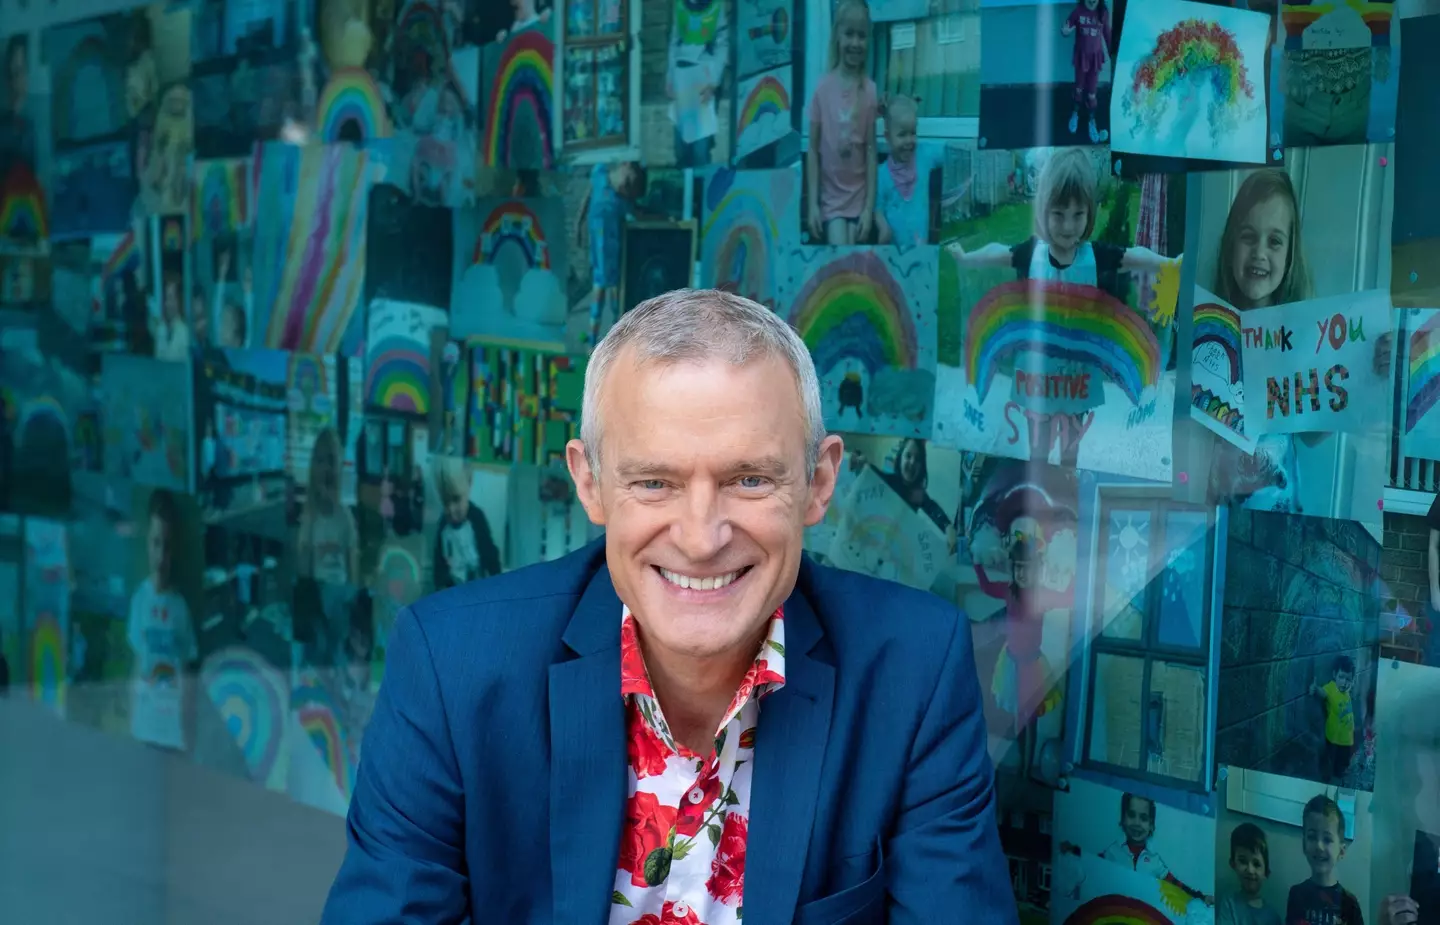 Jeremy Vine has hit back at his critic on Twitter.